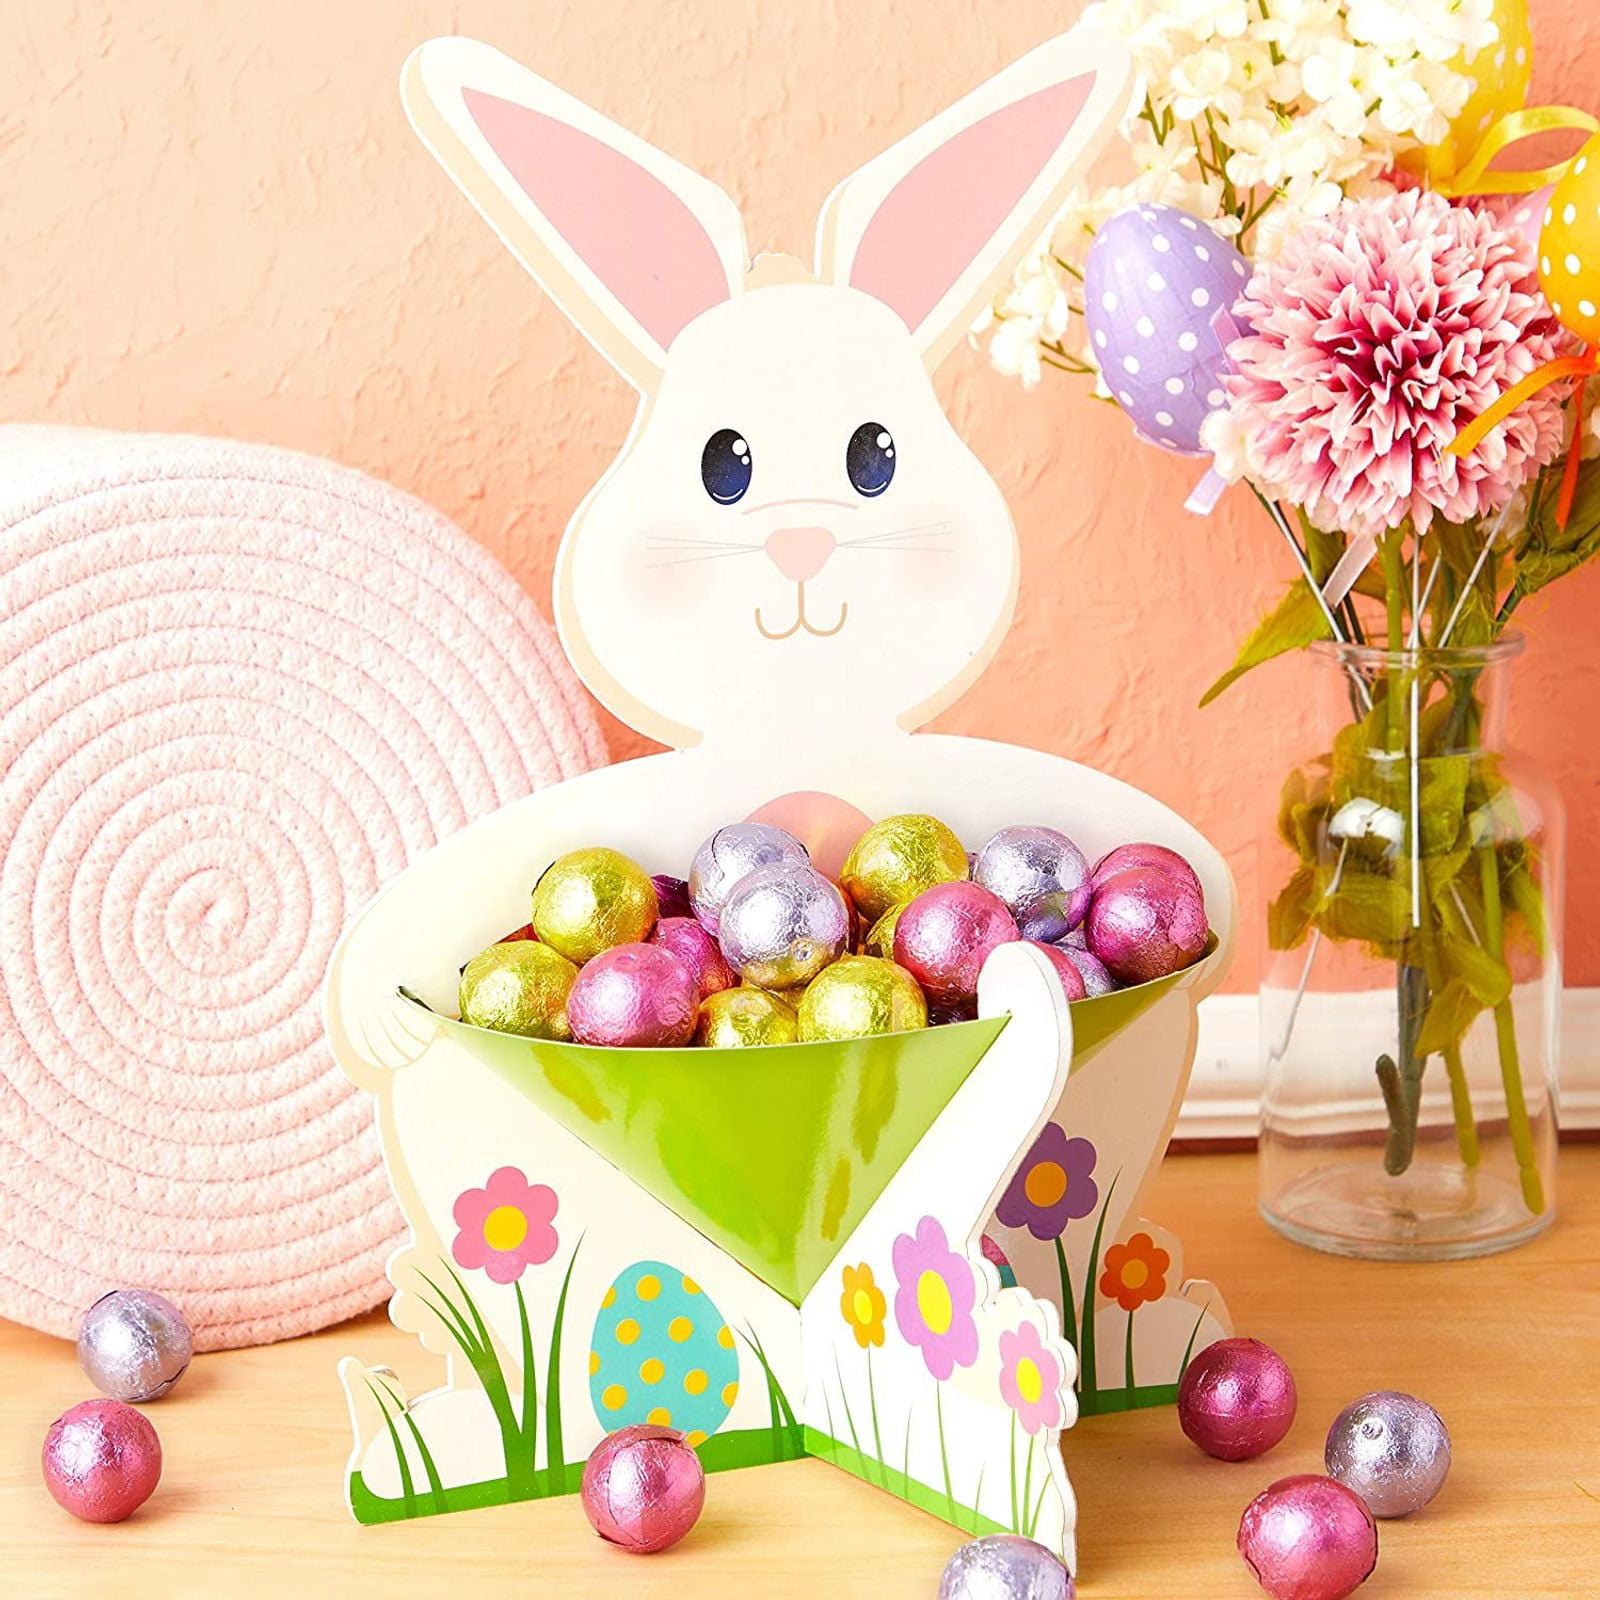 Eggs Egg & Candy Holder Set Holds Chocolate 8.7 X 12.7 X 8.7 inches Juvale Great for Easter Party Favors Table Displays Easter Themed Cups with Stand Candy 2 Pack Easter Party Decorations 